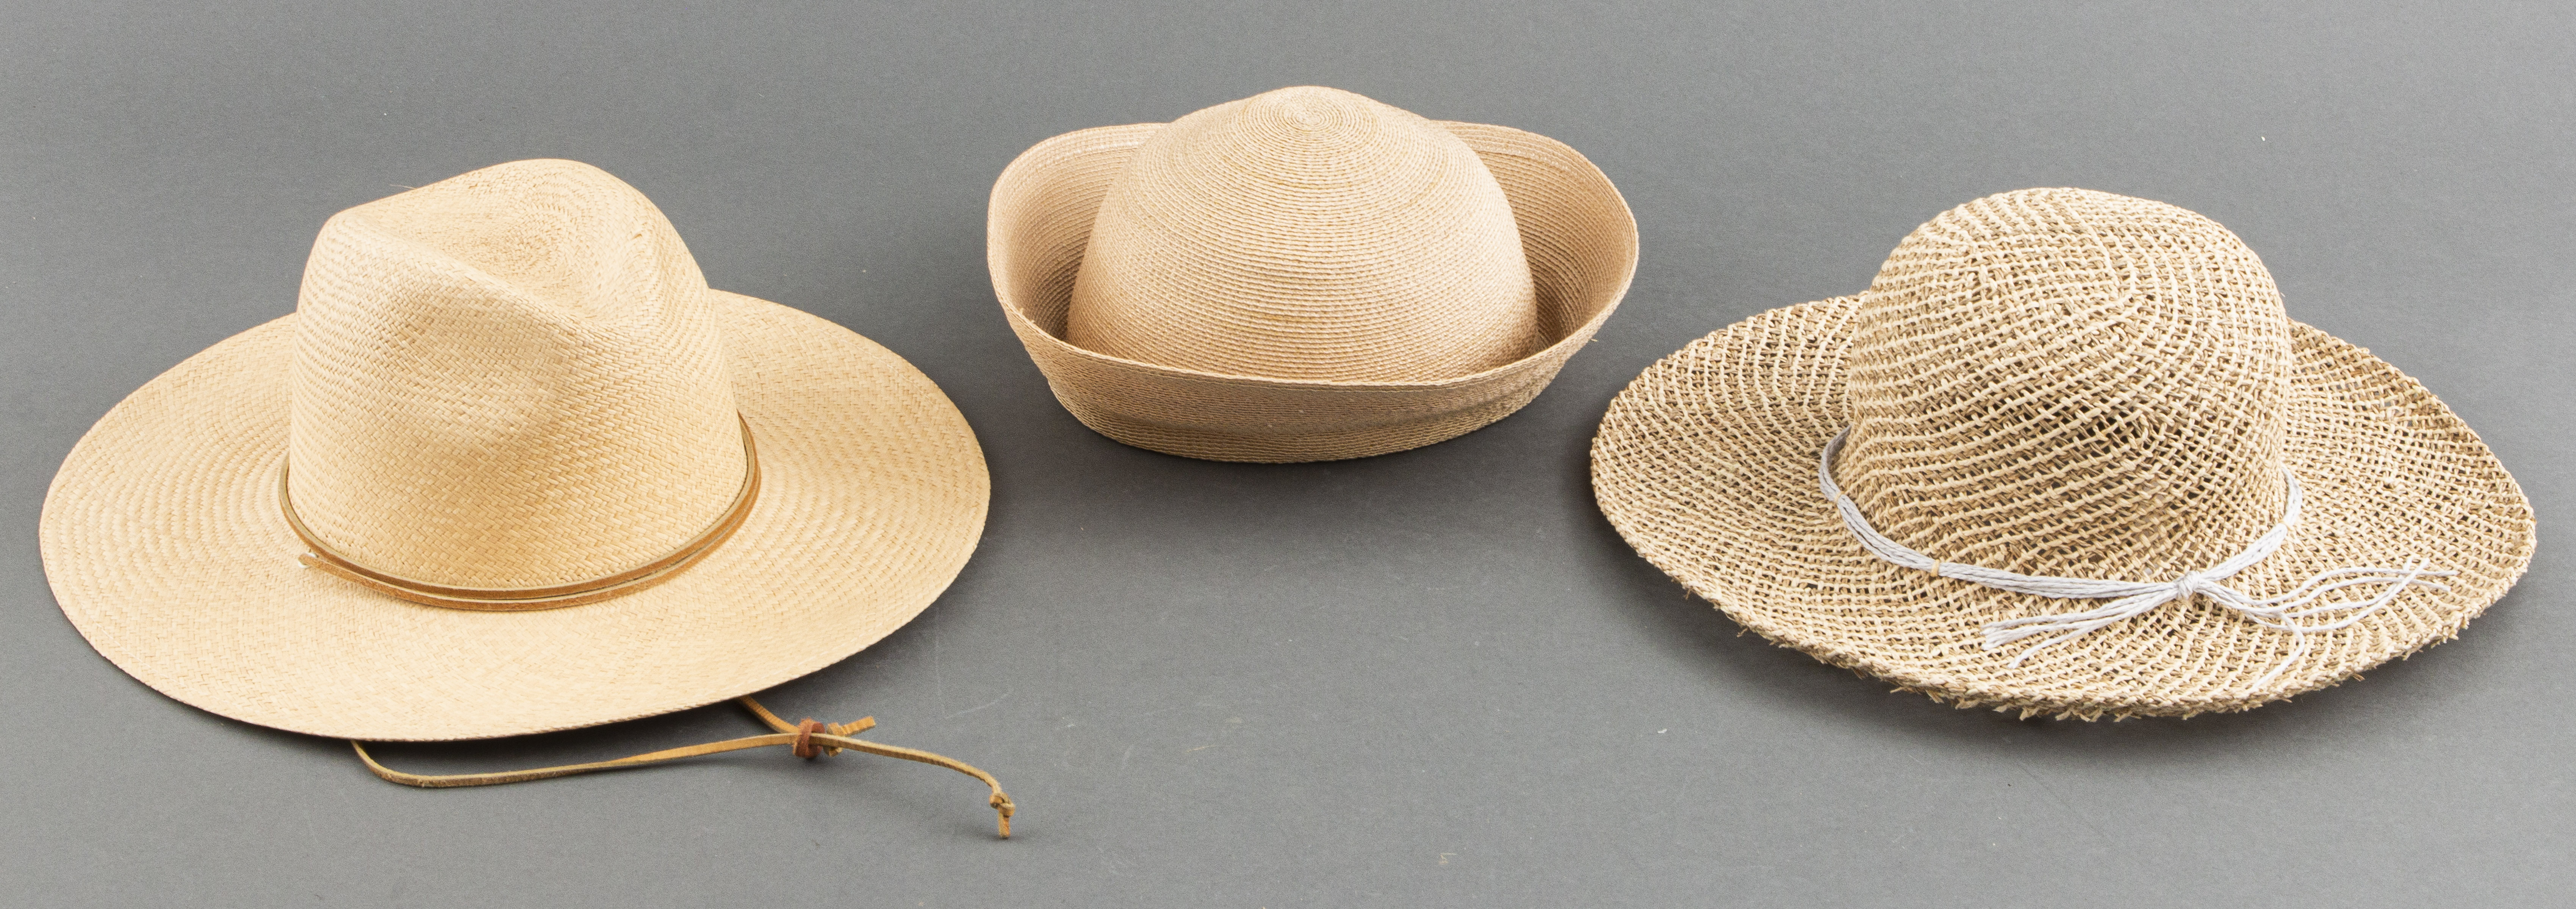 ASSORTED STRAW HATS GROUP OF 3 3c49e8